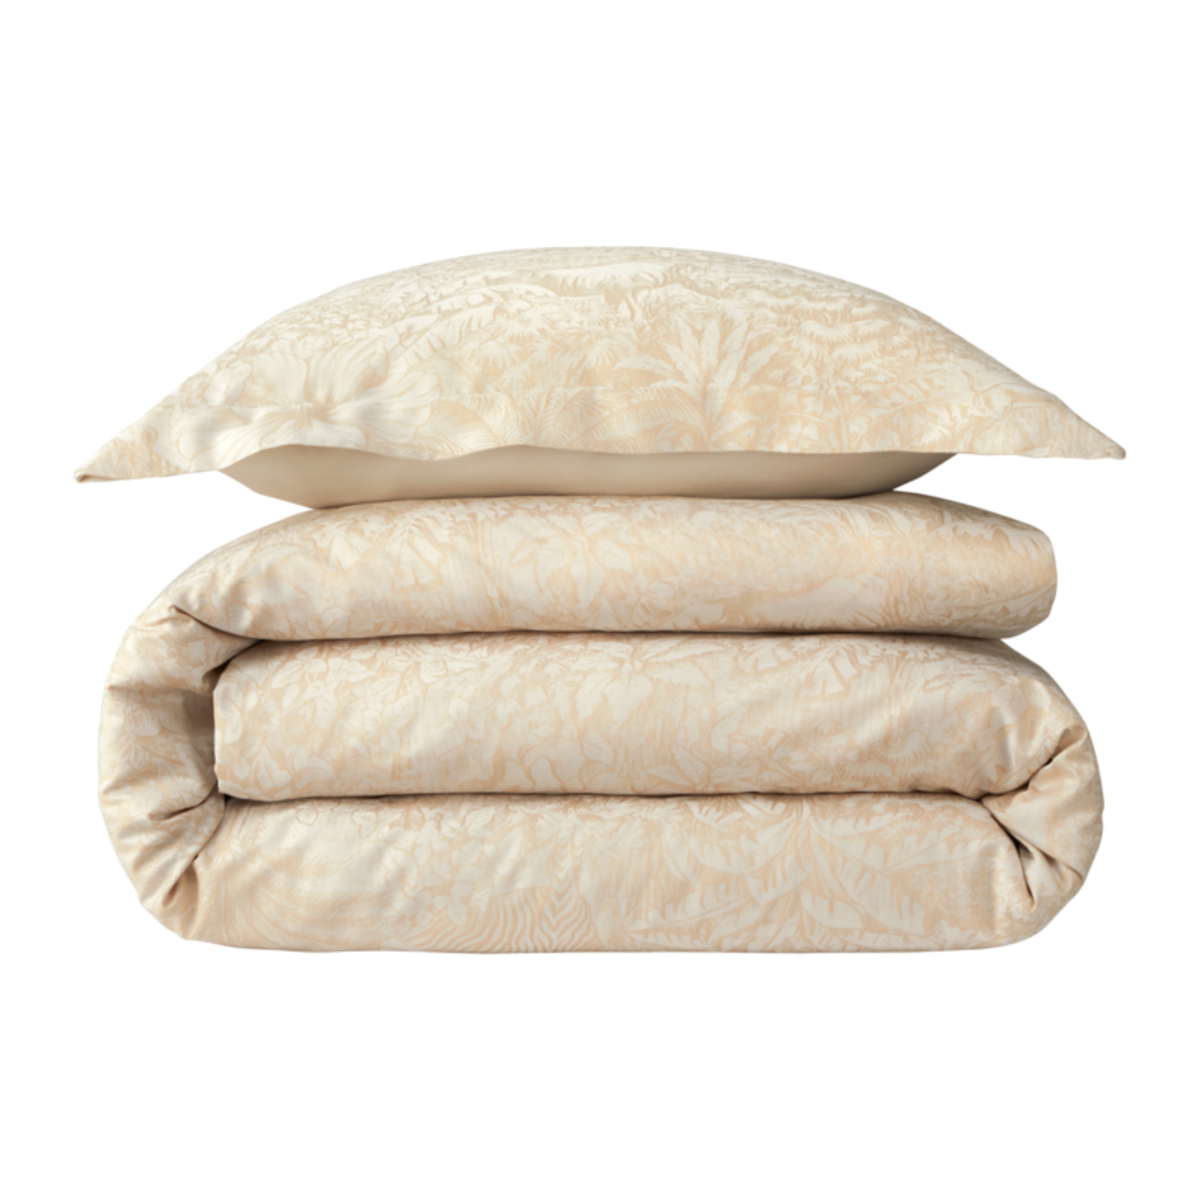 Stack of Duvet Cover and Sham of Yves Delorme Faune Bedding